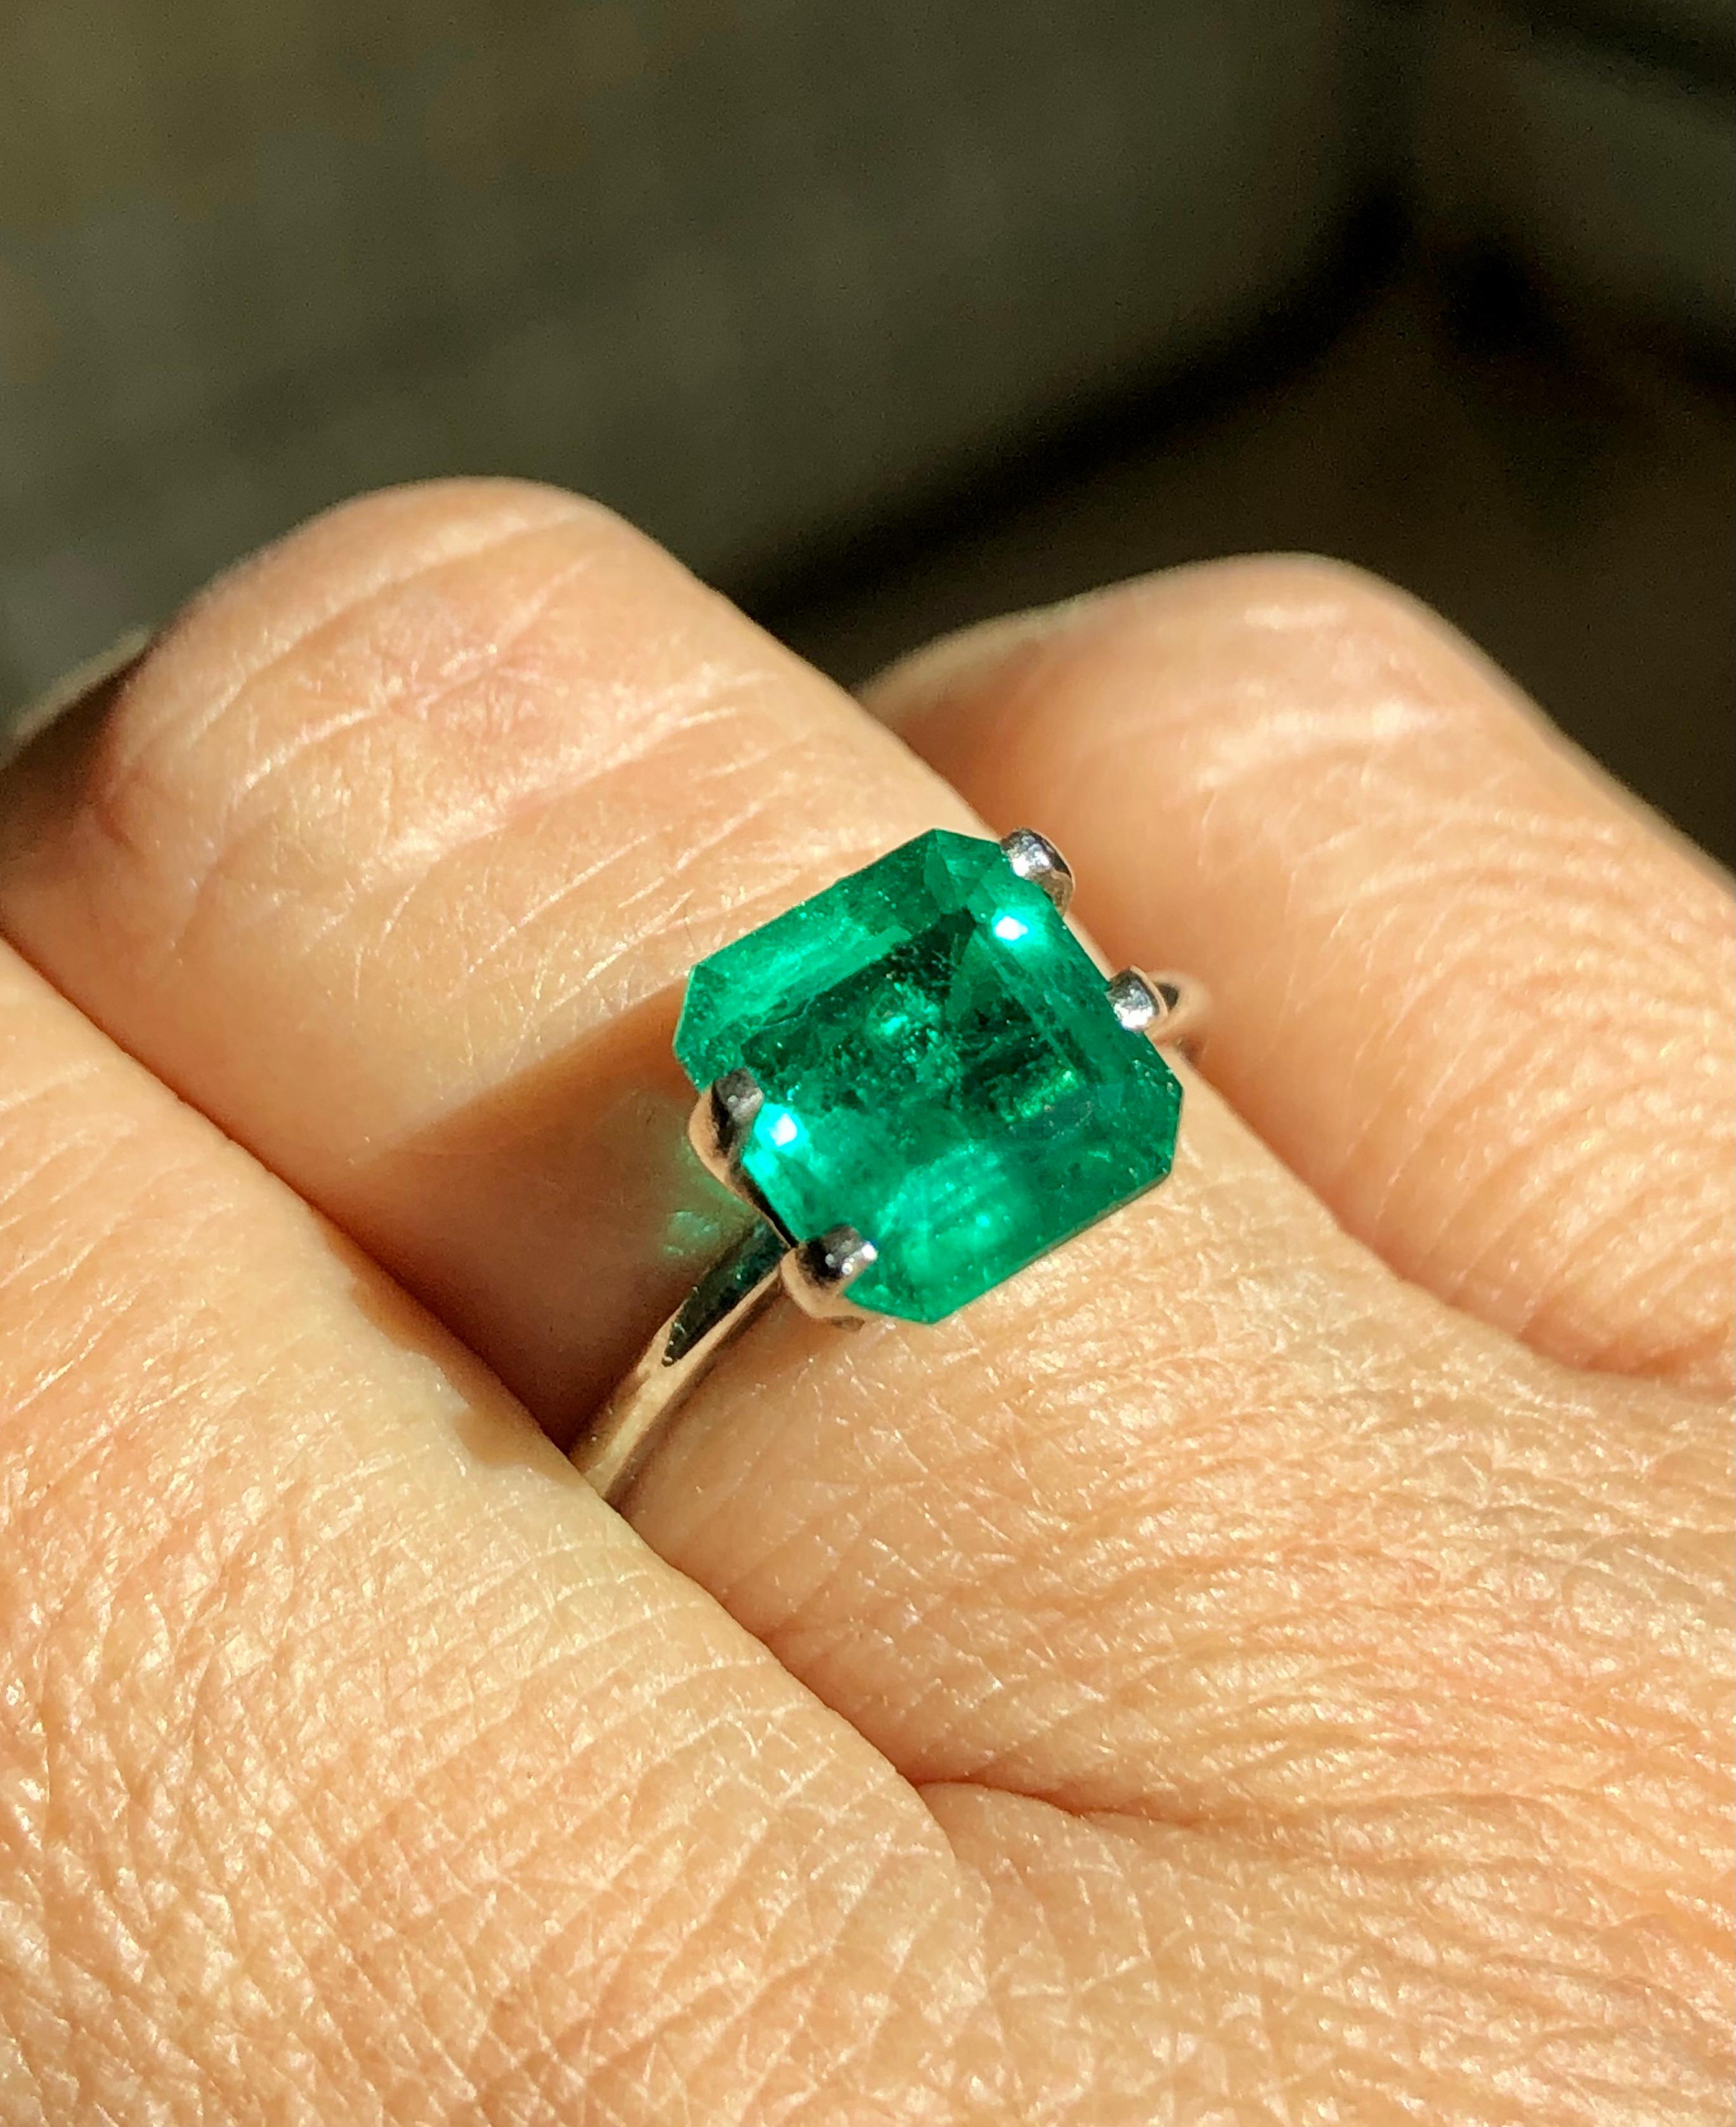 Certified 2.30 Carat Natural AAA Colombian Emerald Square Cut Vivid Green
Colombian Emerald 2.30 Carats
Measurements: 8.42 x 8.14 x 4.98 mm
Clean Clarity
Full transparency 
Classic Colombian Vivid Green color
CDTEC Certified 
Lab Report Available:  